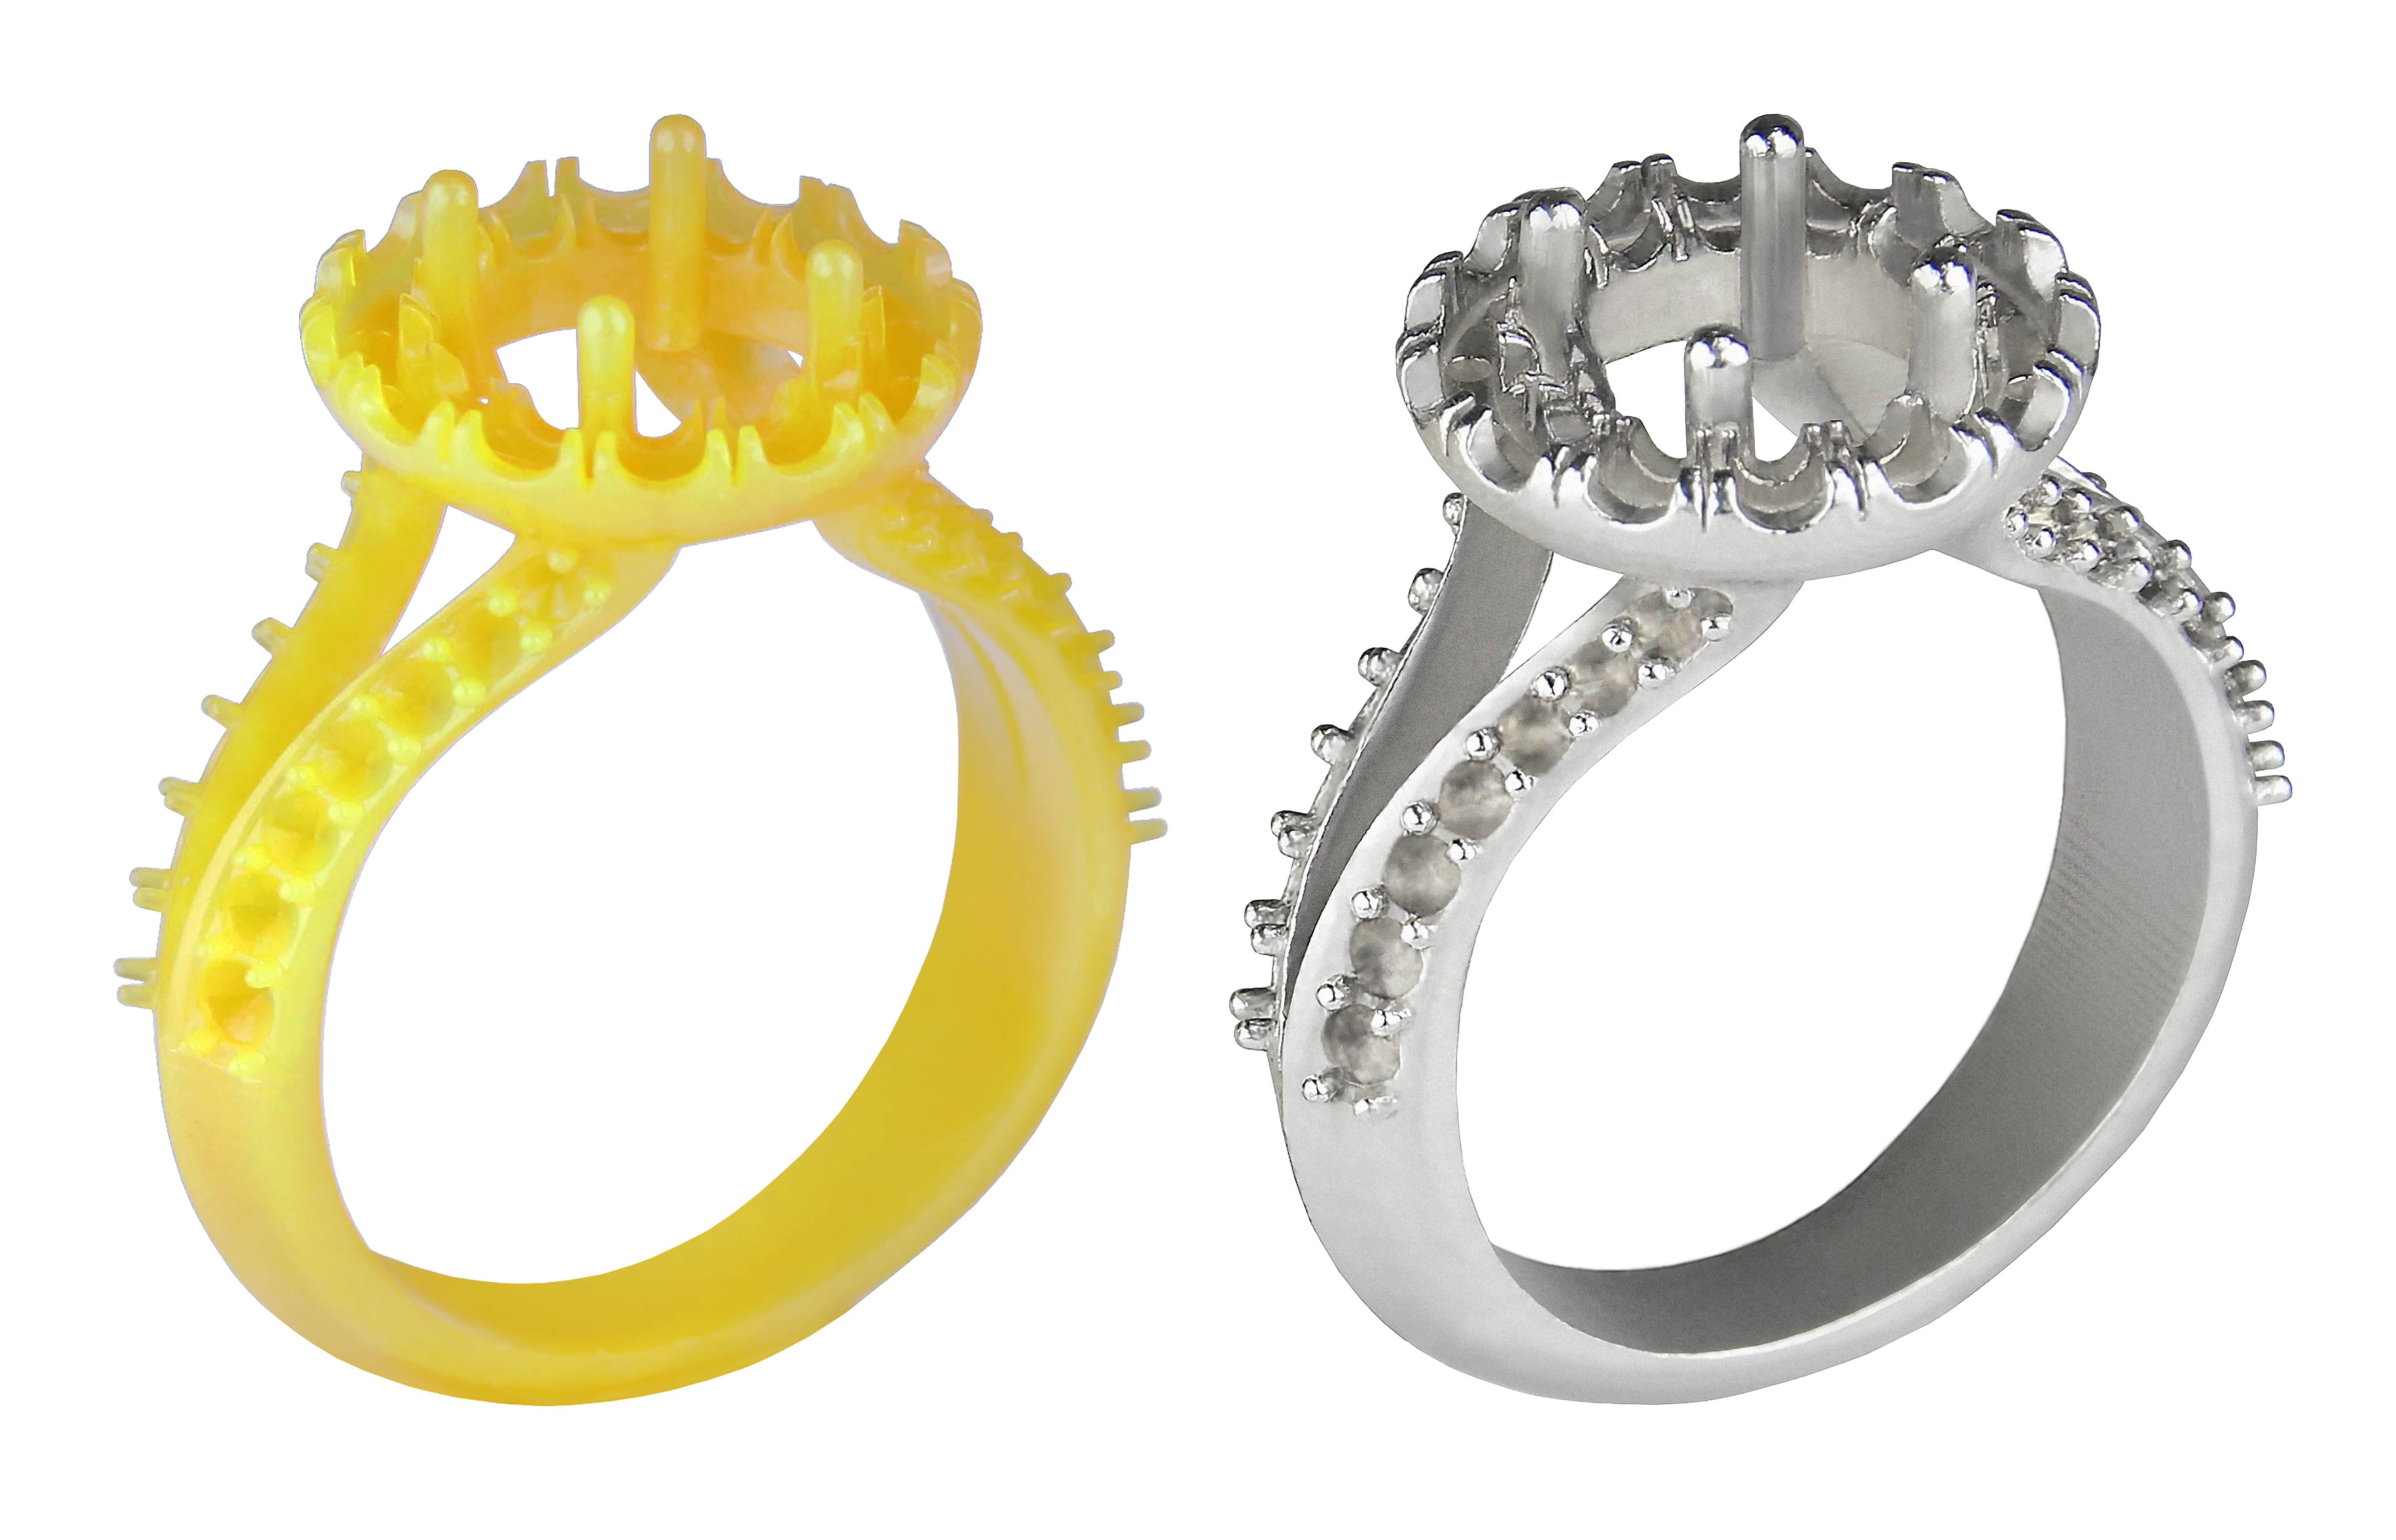 Easy Cast 2.0 is a high-wax content material for 3D printing jewelry patterns on EnvisionTEC's high-speed cDLM printing technology.